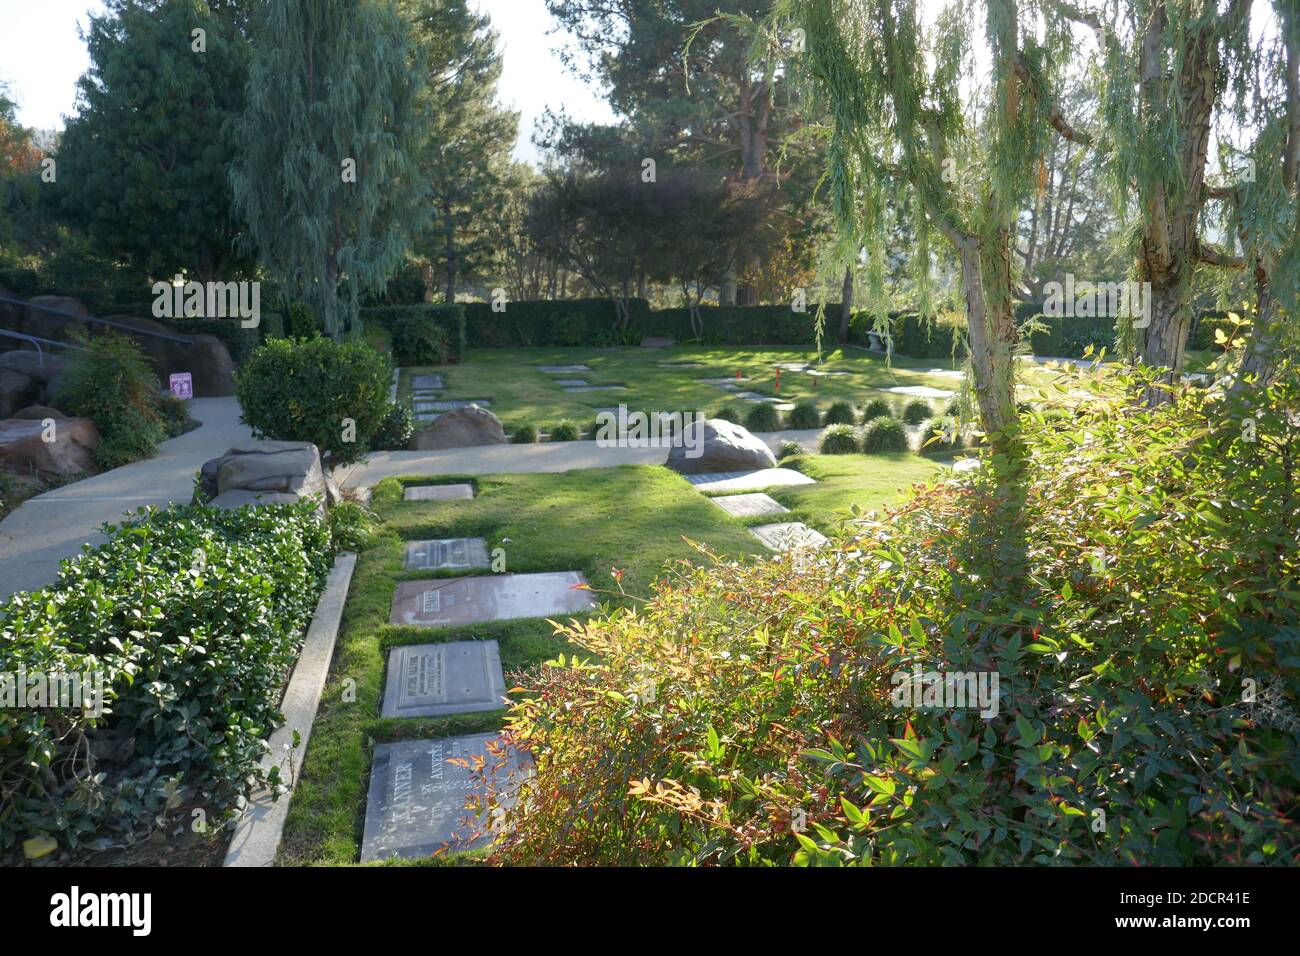 Los Angeles, California, USA 17th November 2020 A general view of atmosphere of Executive Brandon Tartikoff's Grave at Mount Sinai Cemetery Hollywood Hills on November 17, 2020 in Los Angeles, California, USA. Photo by Barry King/Alamy Stock Photo Stock Photo